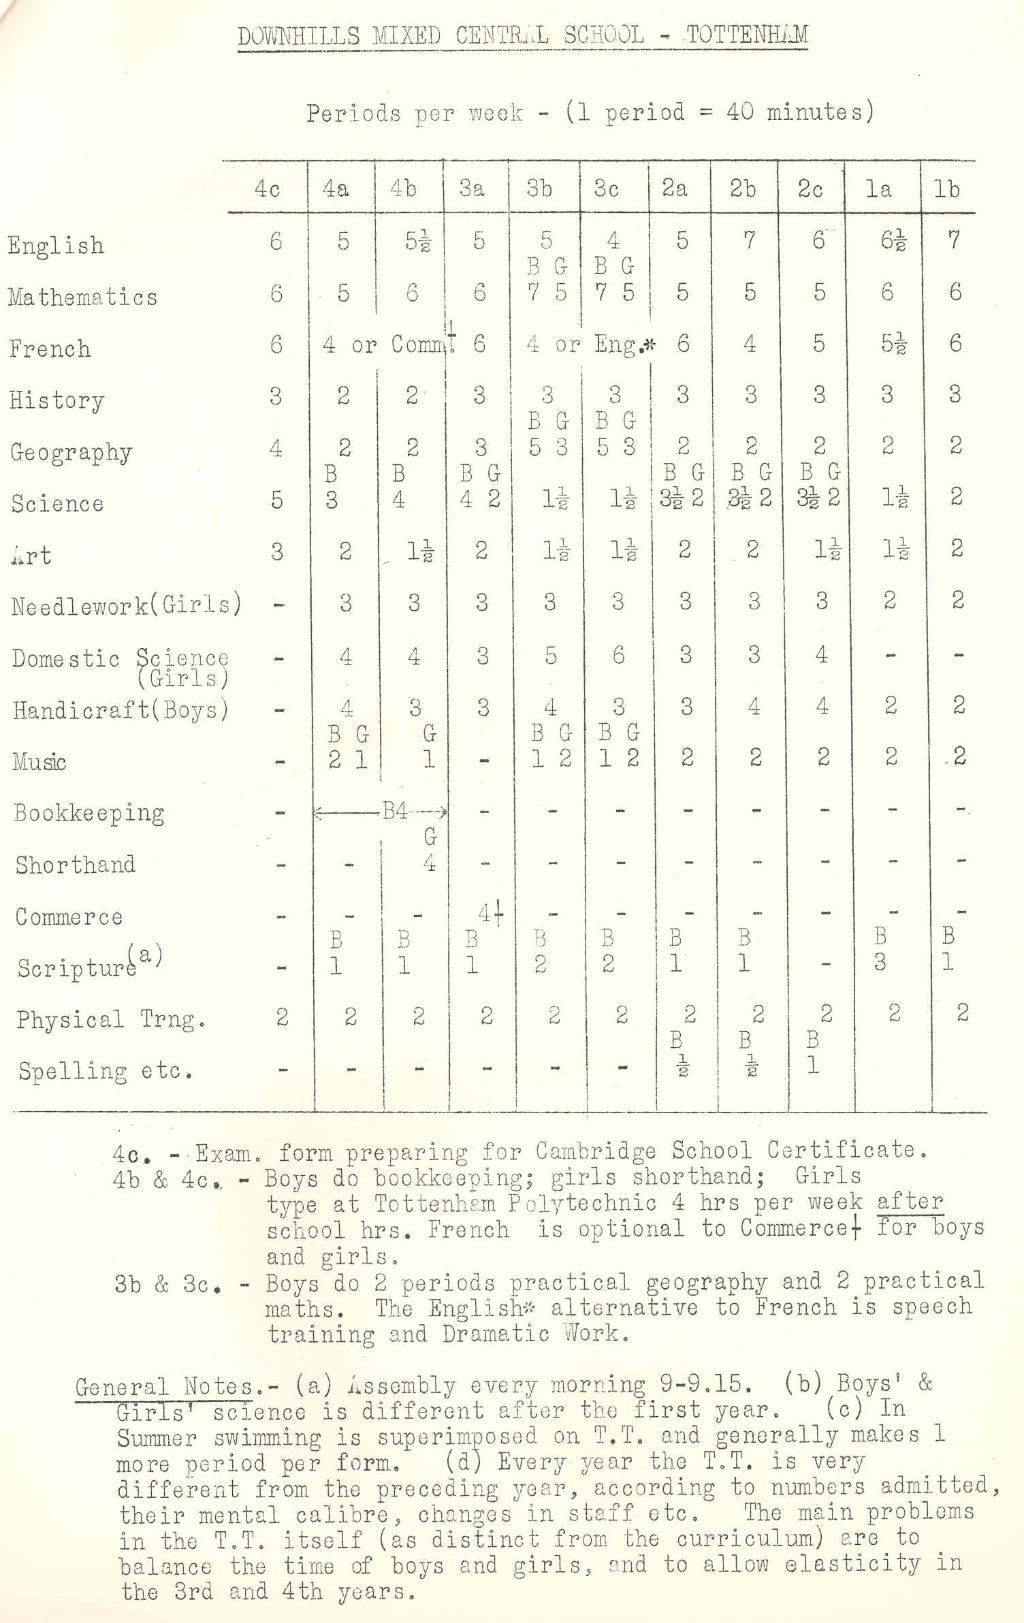 School syllabuses for two mixed schools in the London area, c.1934